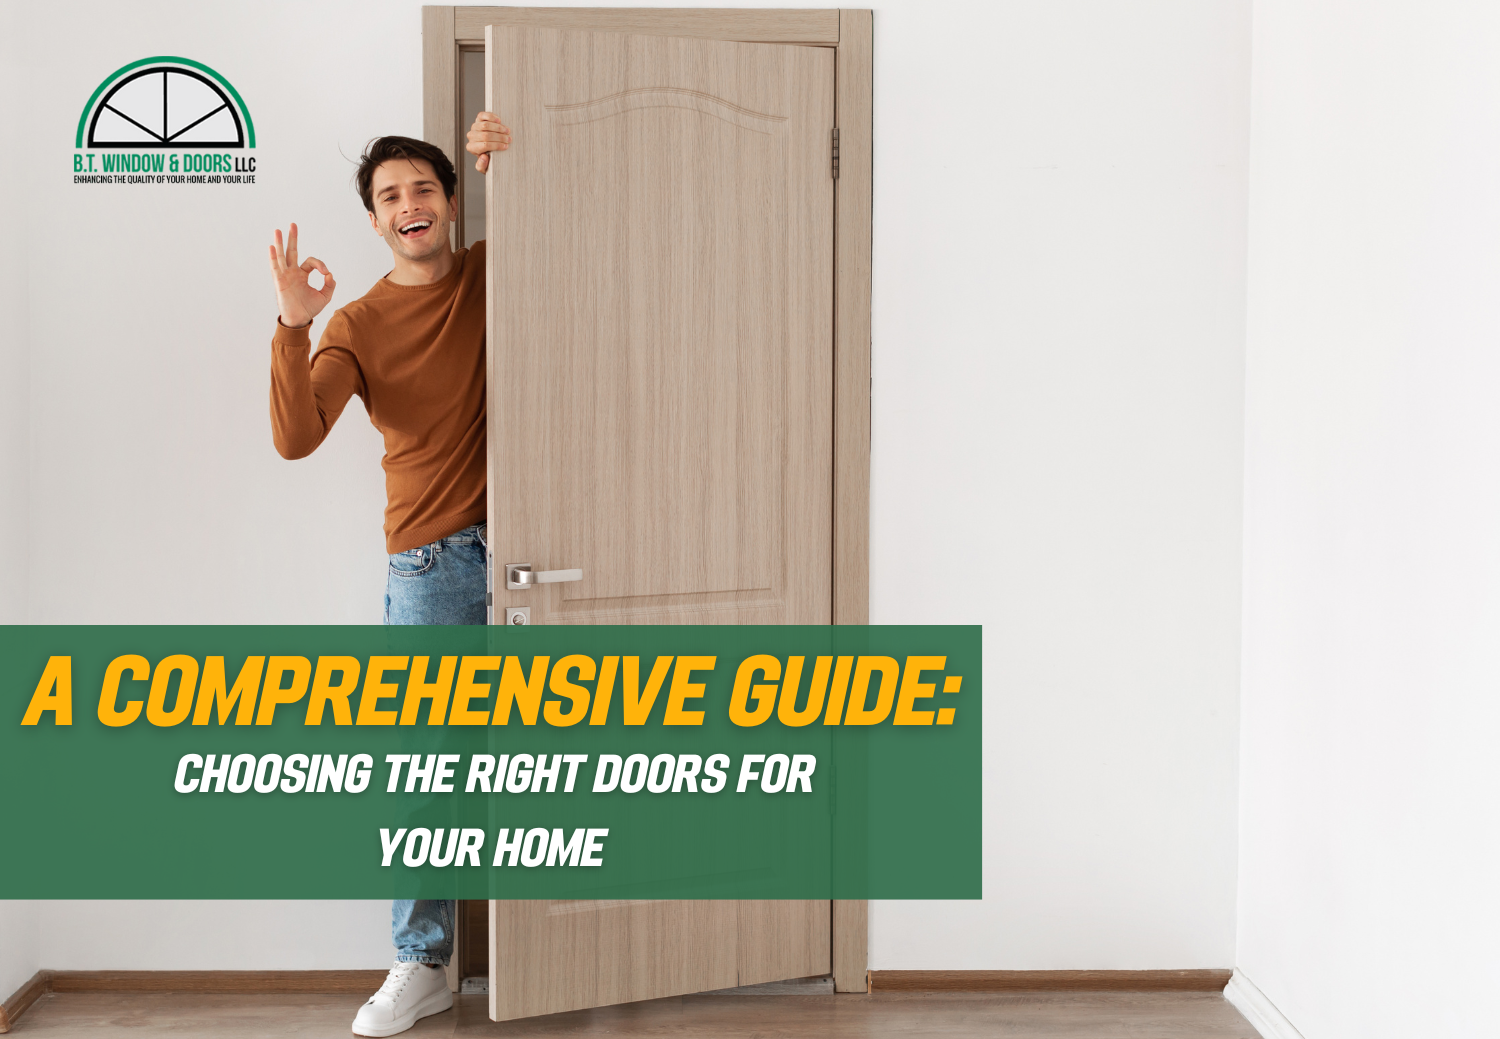 A Comprehensive Guide to Choosing the Right Doors for Your Home